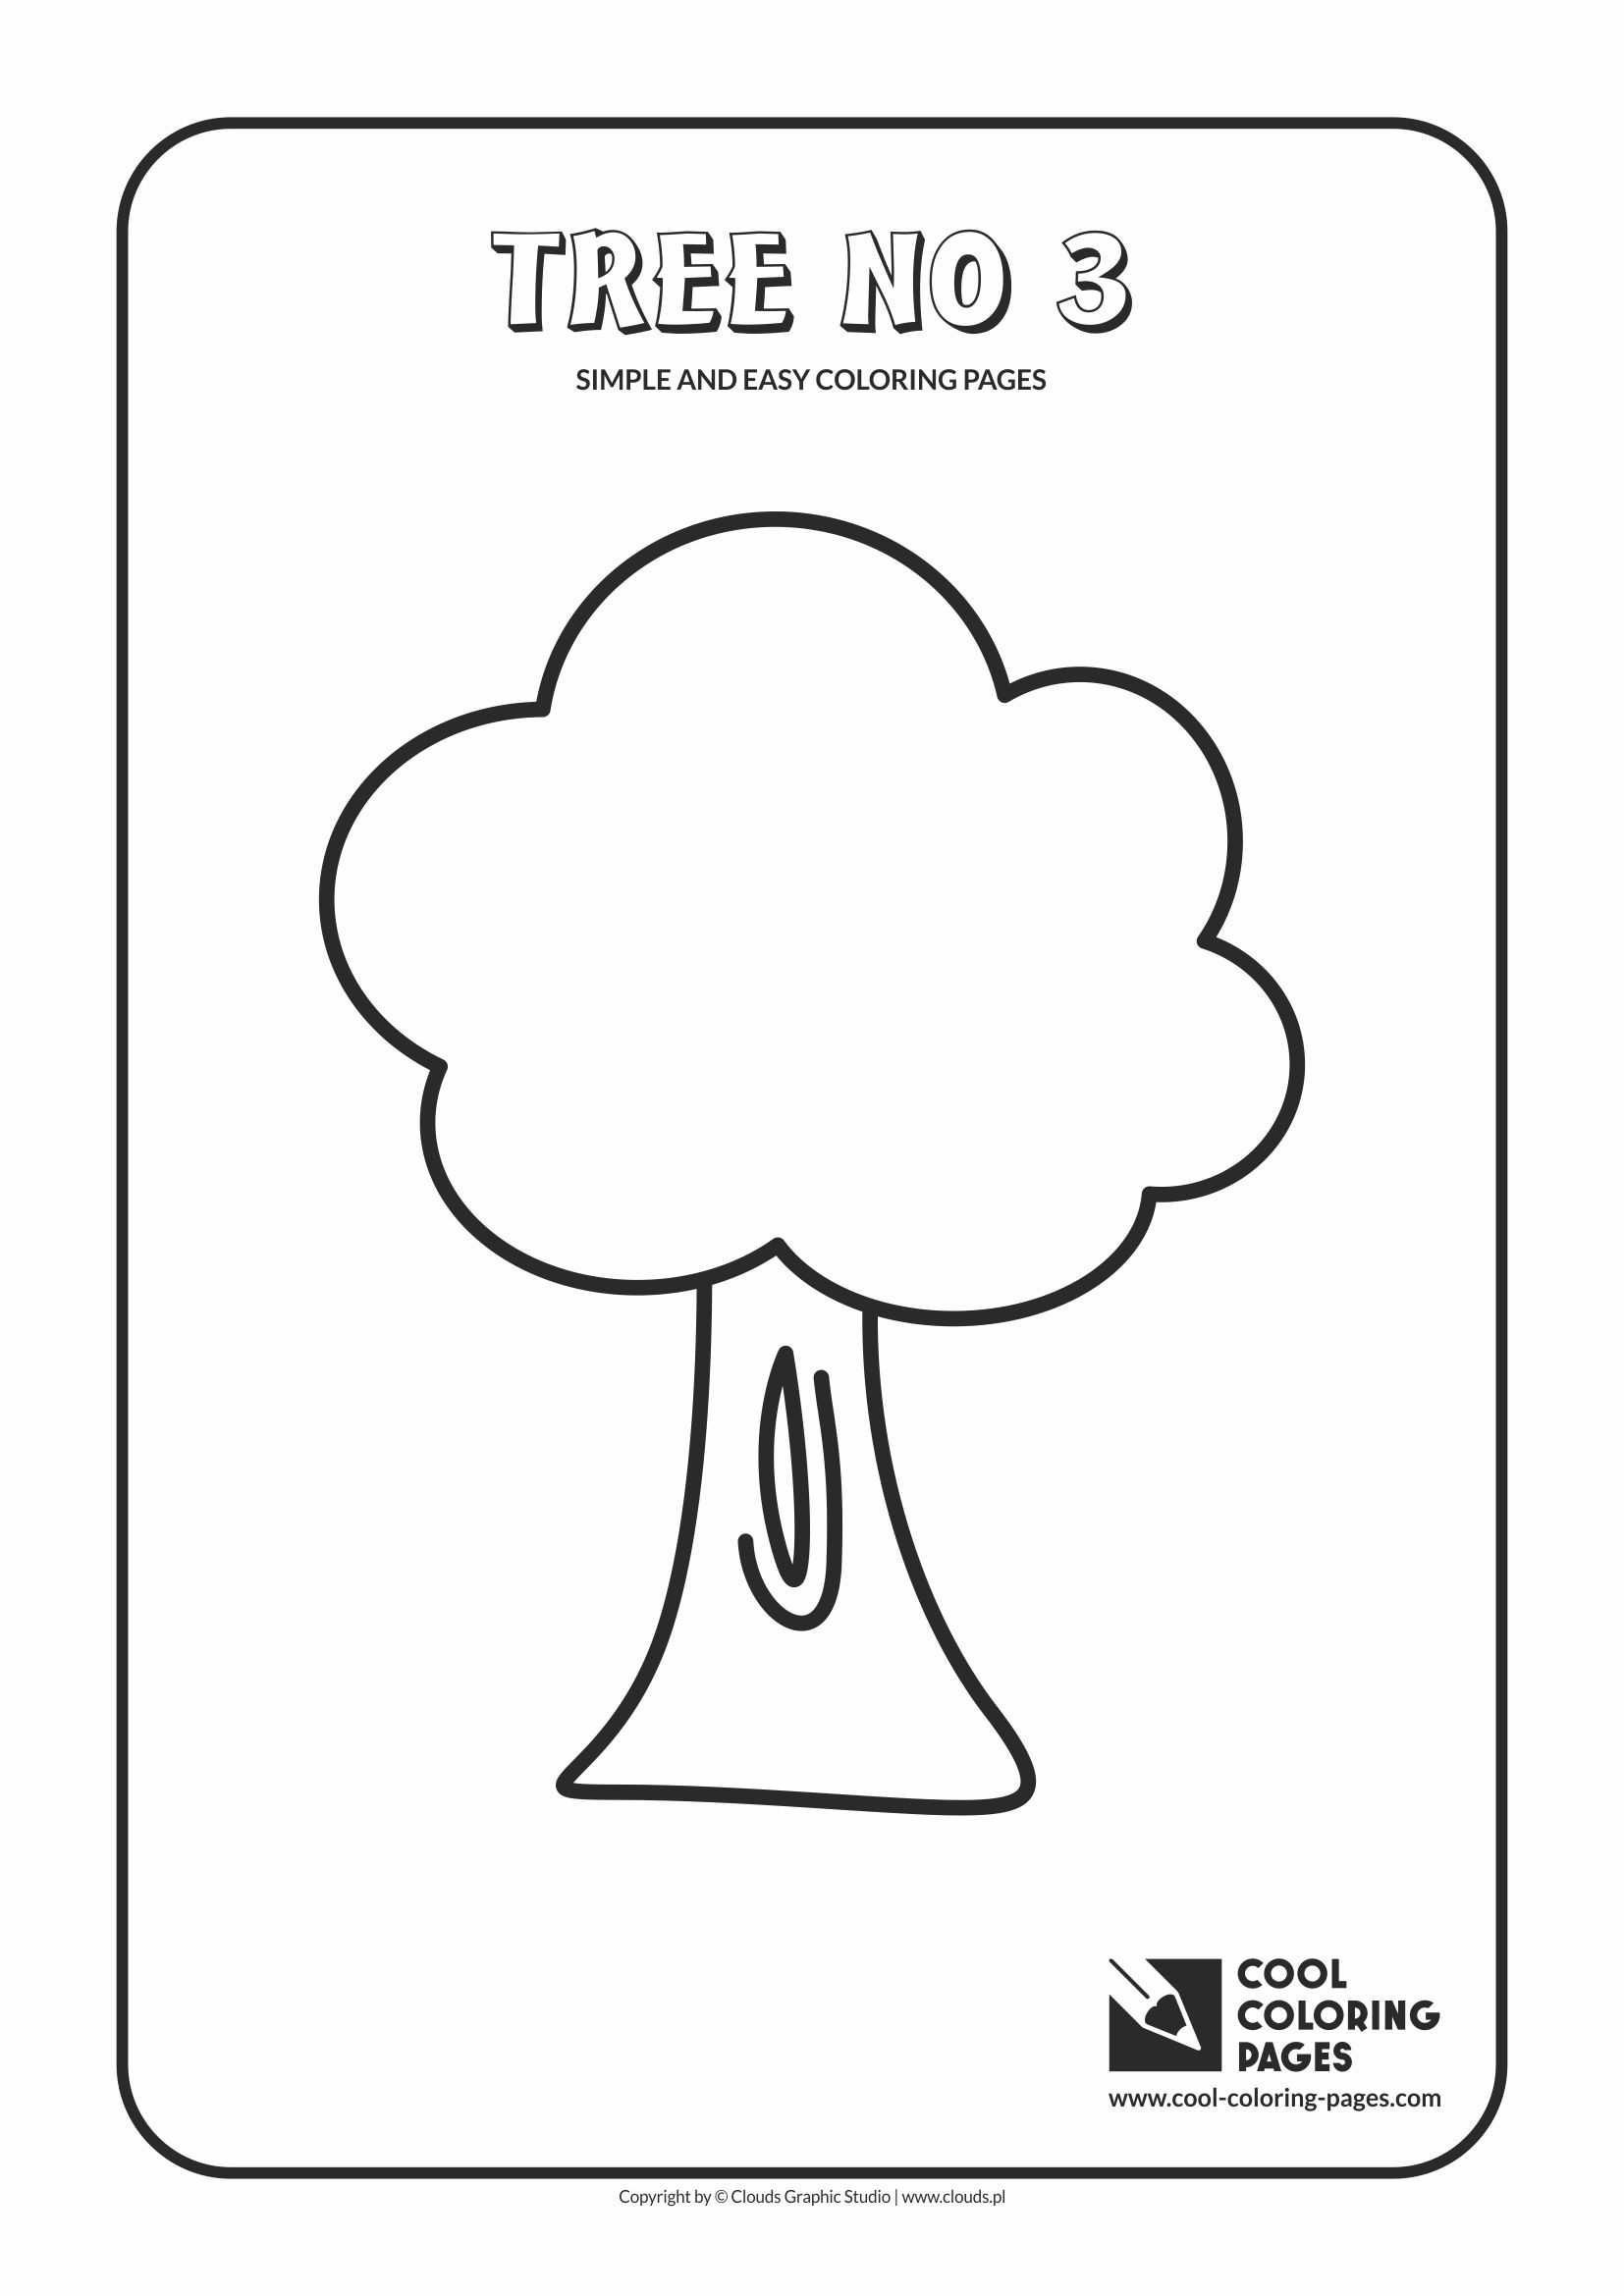 Simple and easy coloring pages for toddlers - Tree no 3